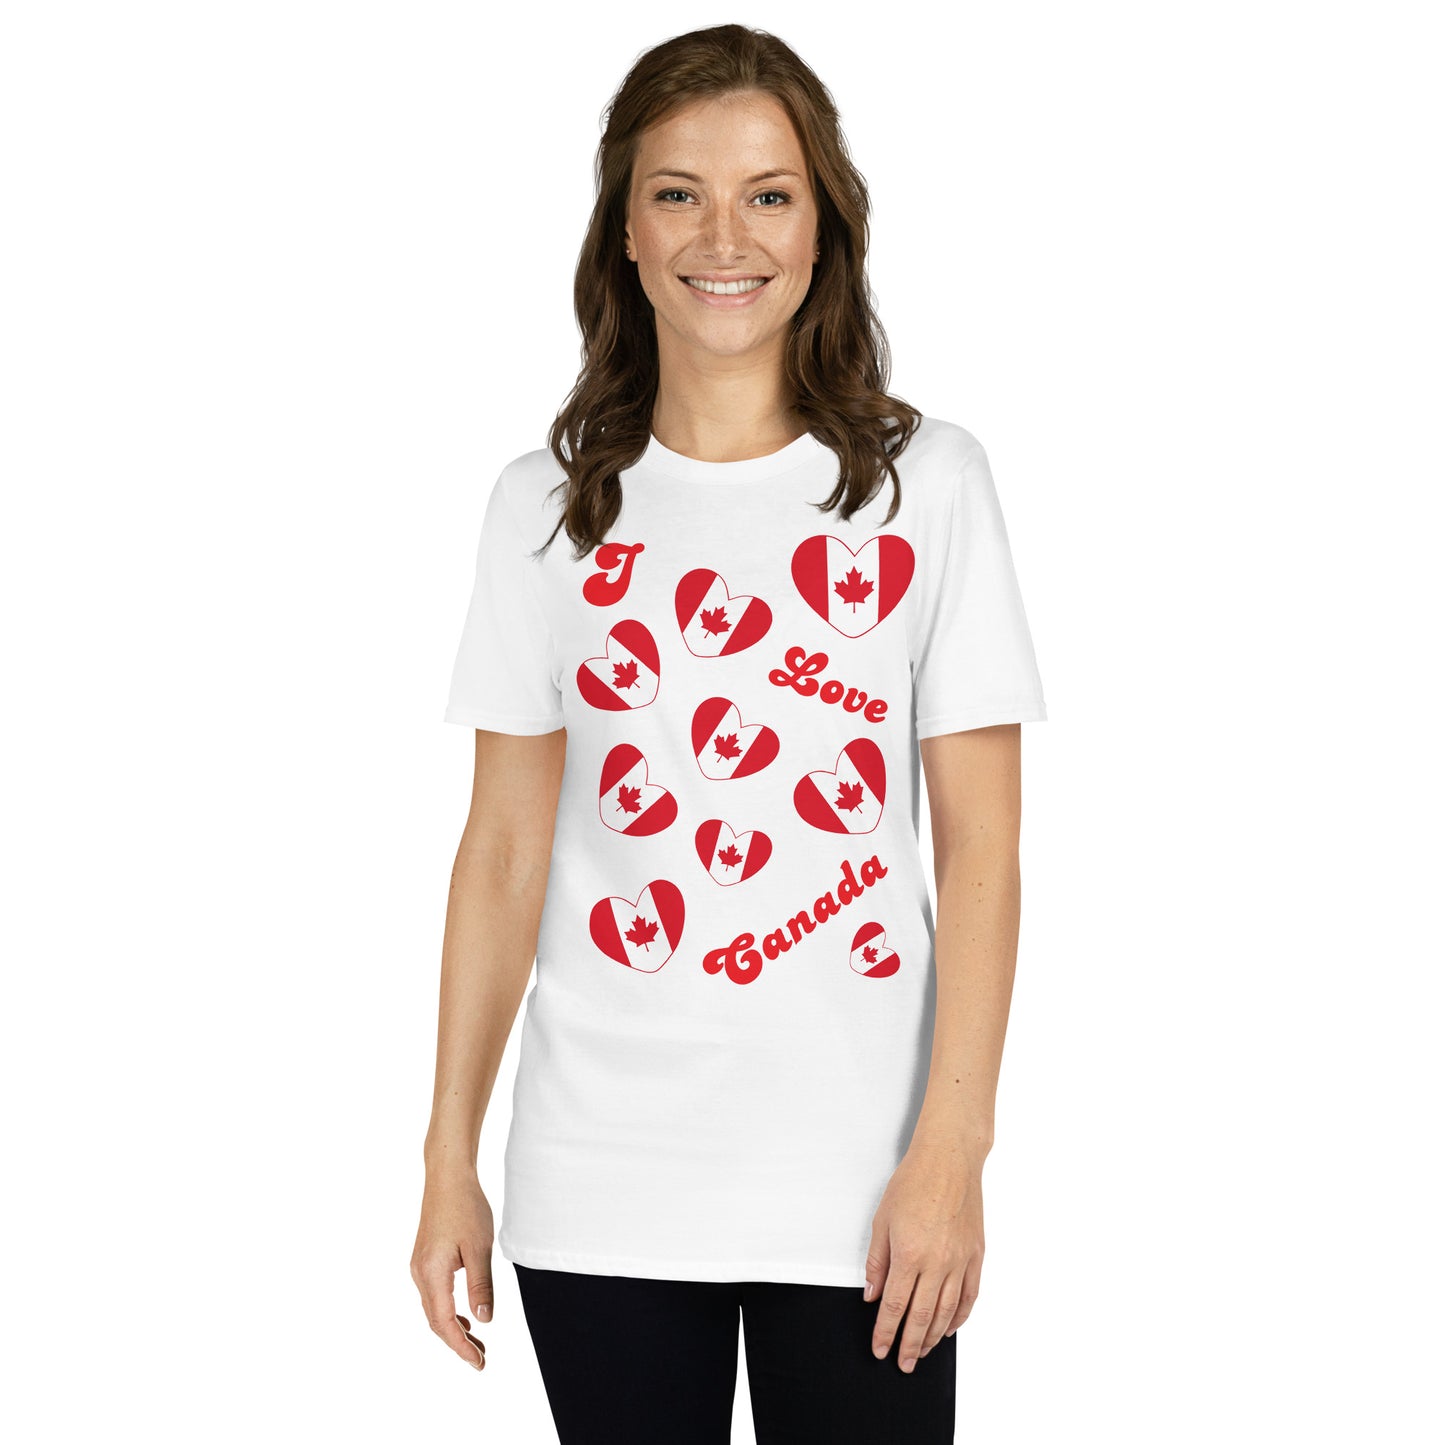 Comfortable I Love Canada graphic tee, perfect for Canada Day